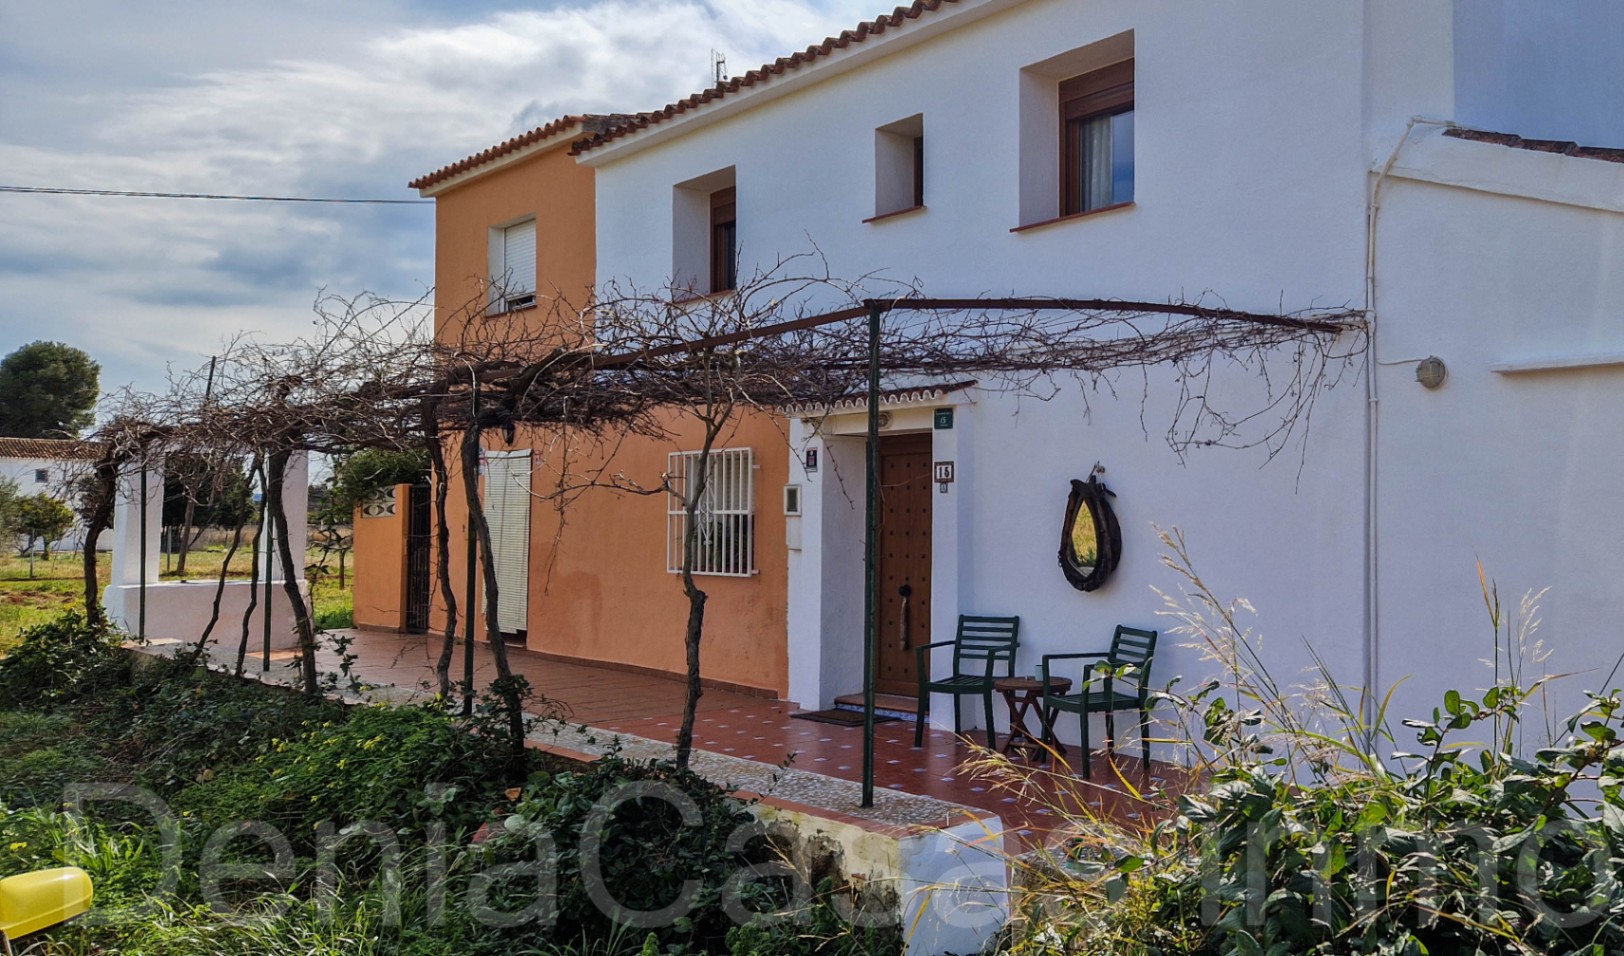 Country atached house near the sea and 3km from Denia